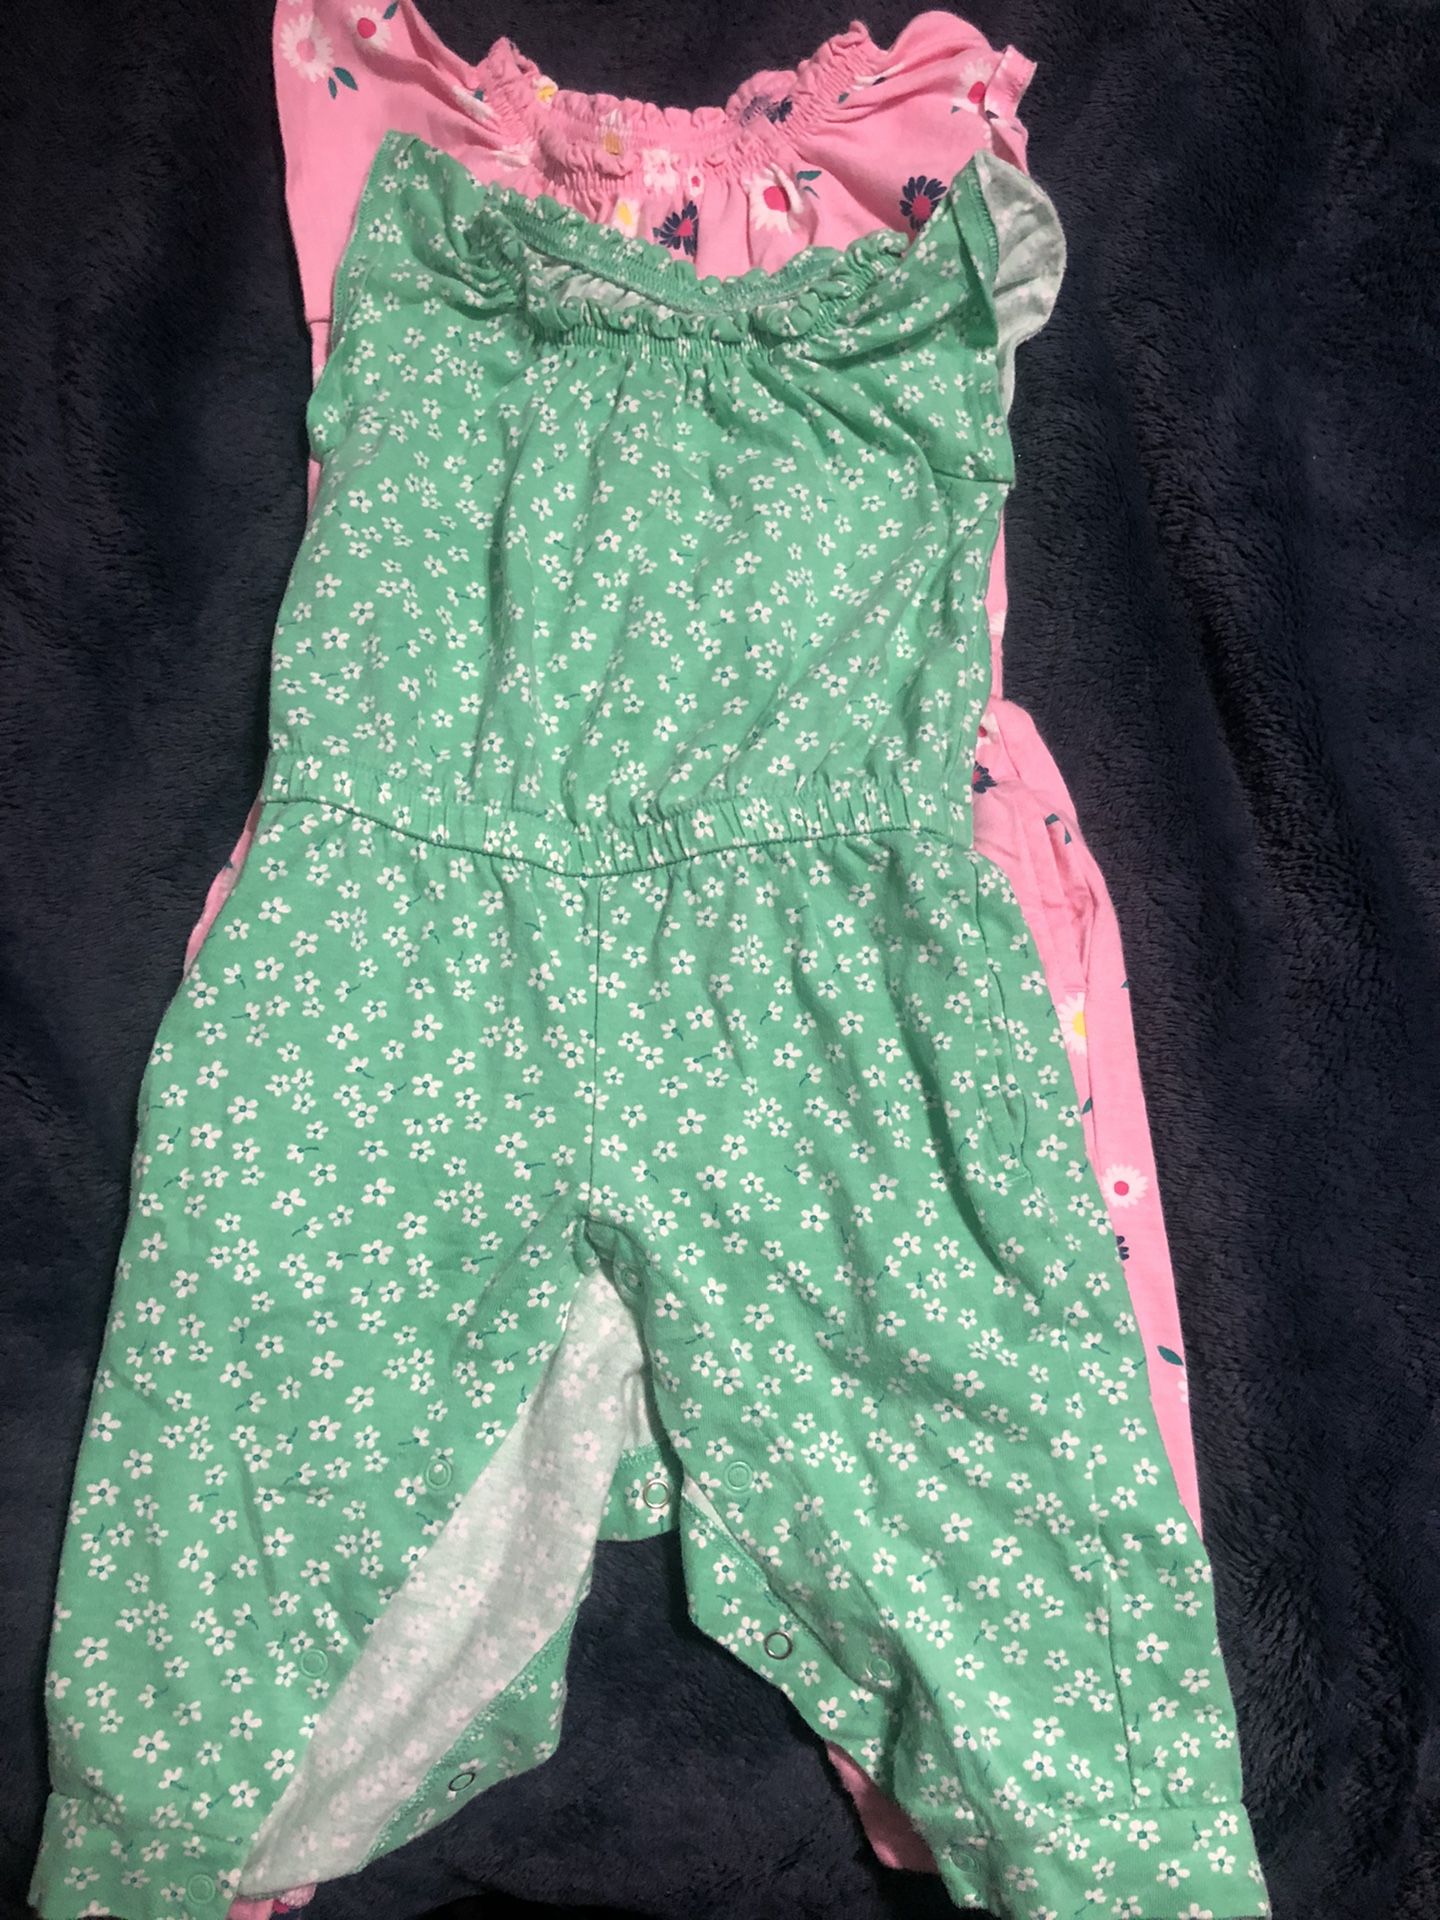 Baby Girl Rompers Size 12 Month And 18 Month 